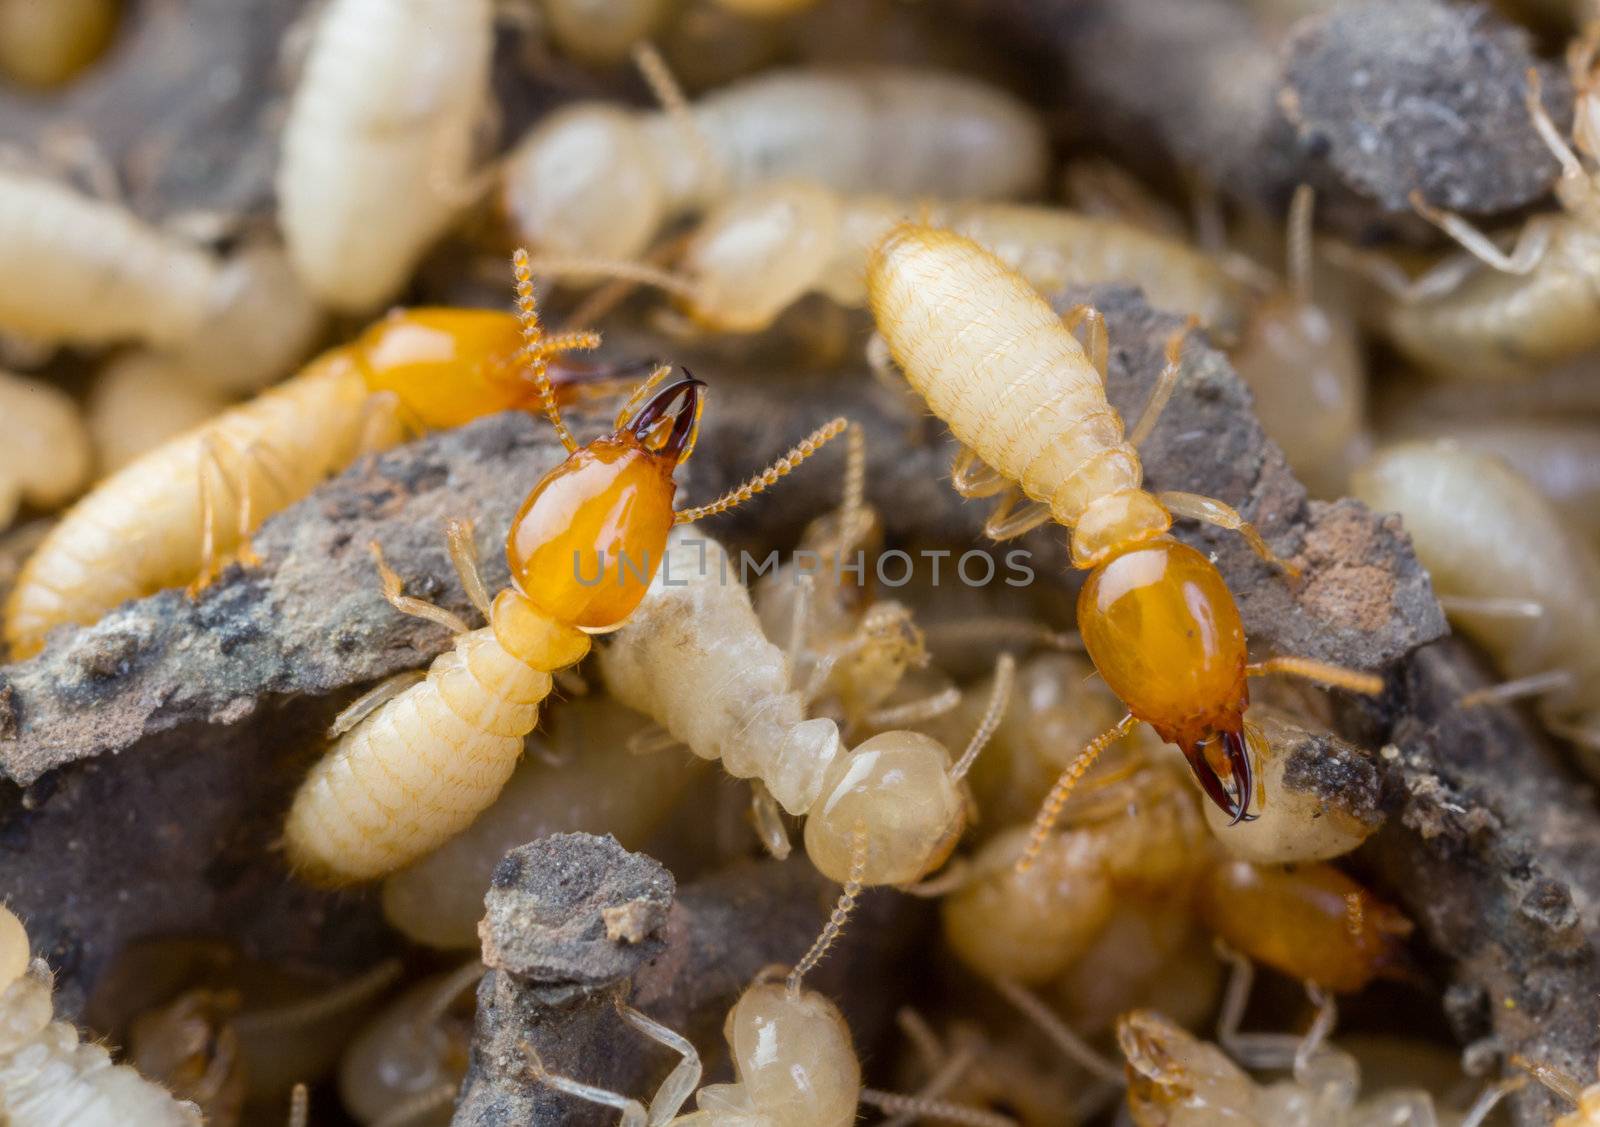 Termites in Thailand by smuay